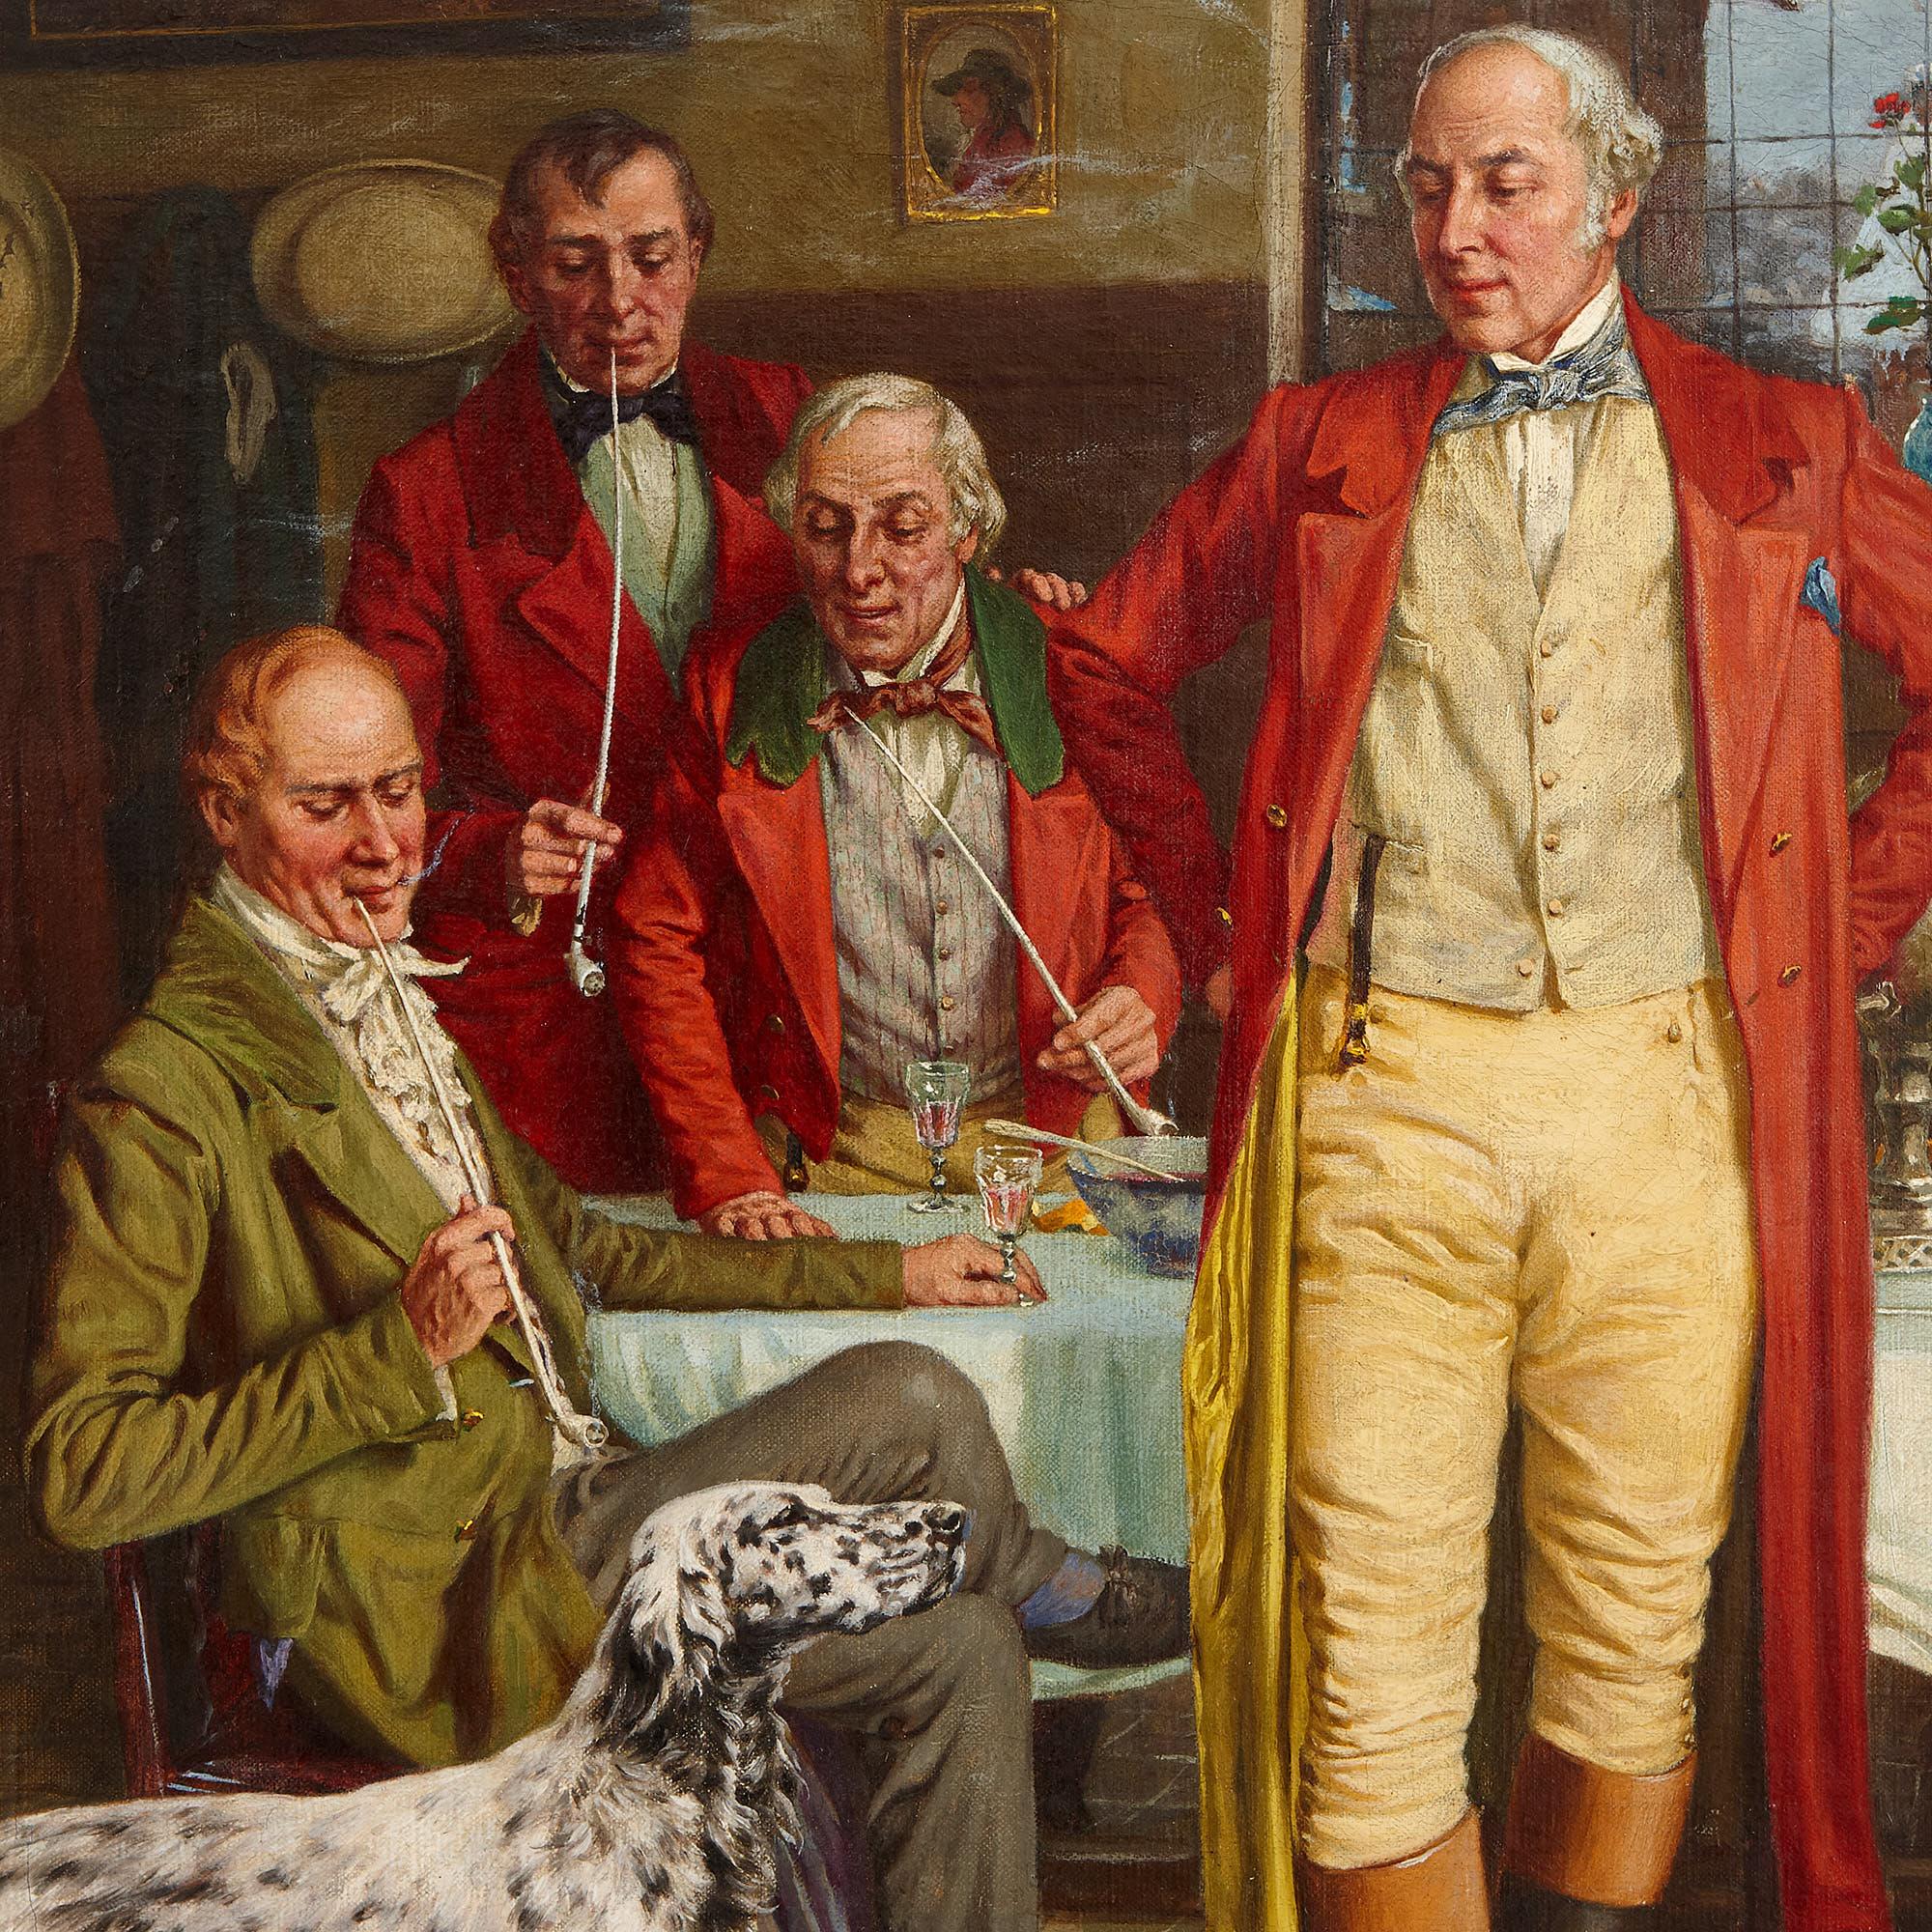 Group portrait painting after the hunt, oil on canvas - Painting by John Alfred Mohlte